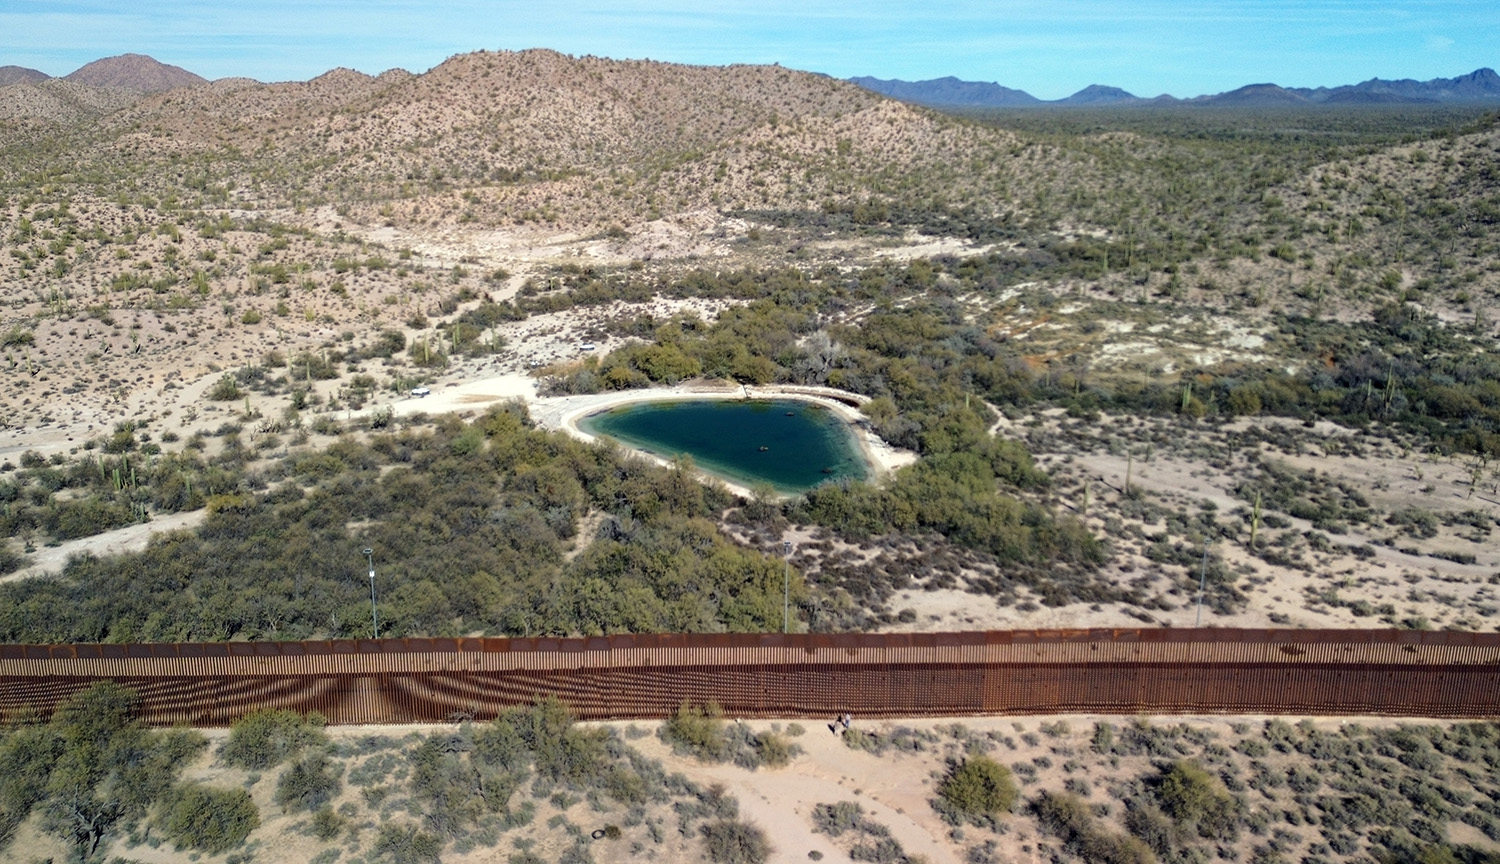 Aerial image showing an arid terrain, with green bushes and, in the middle, a body of water known as the Quitobaquito spring. The terrain is traversed from side to side by a wall, preventing access to the spring from the southern side.